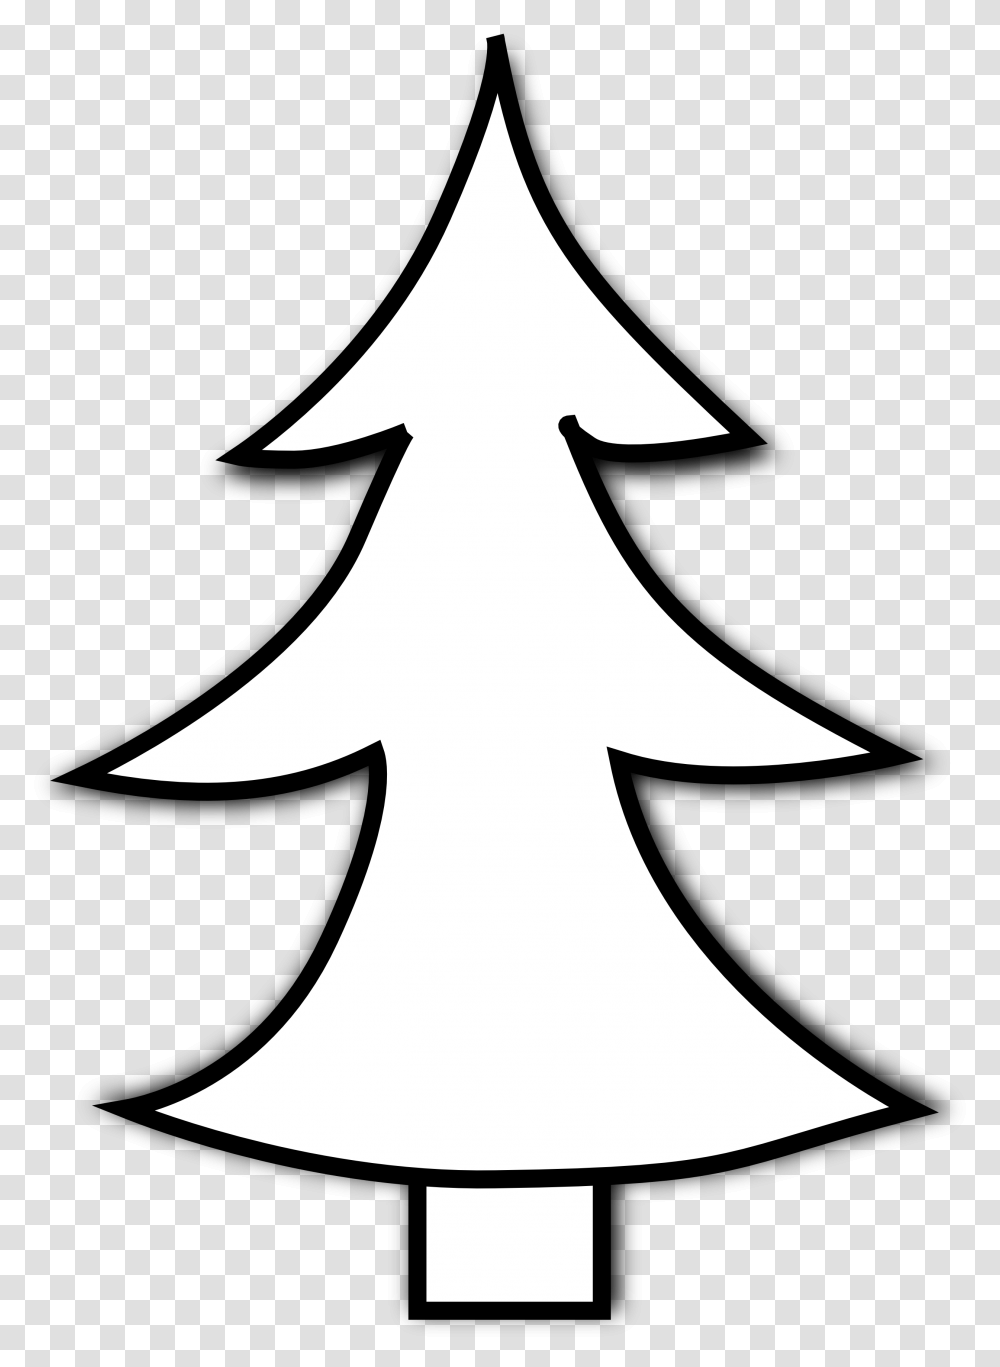 White Christmas Tree Clipart Black Clipart Black And White Christmas Tree, Star Symbol Transparent Png